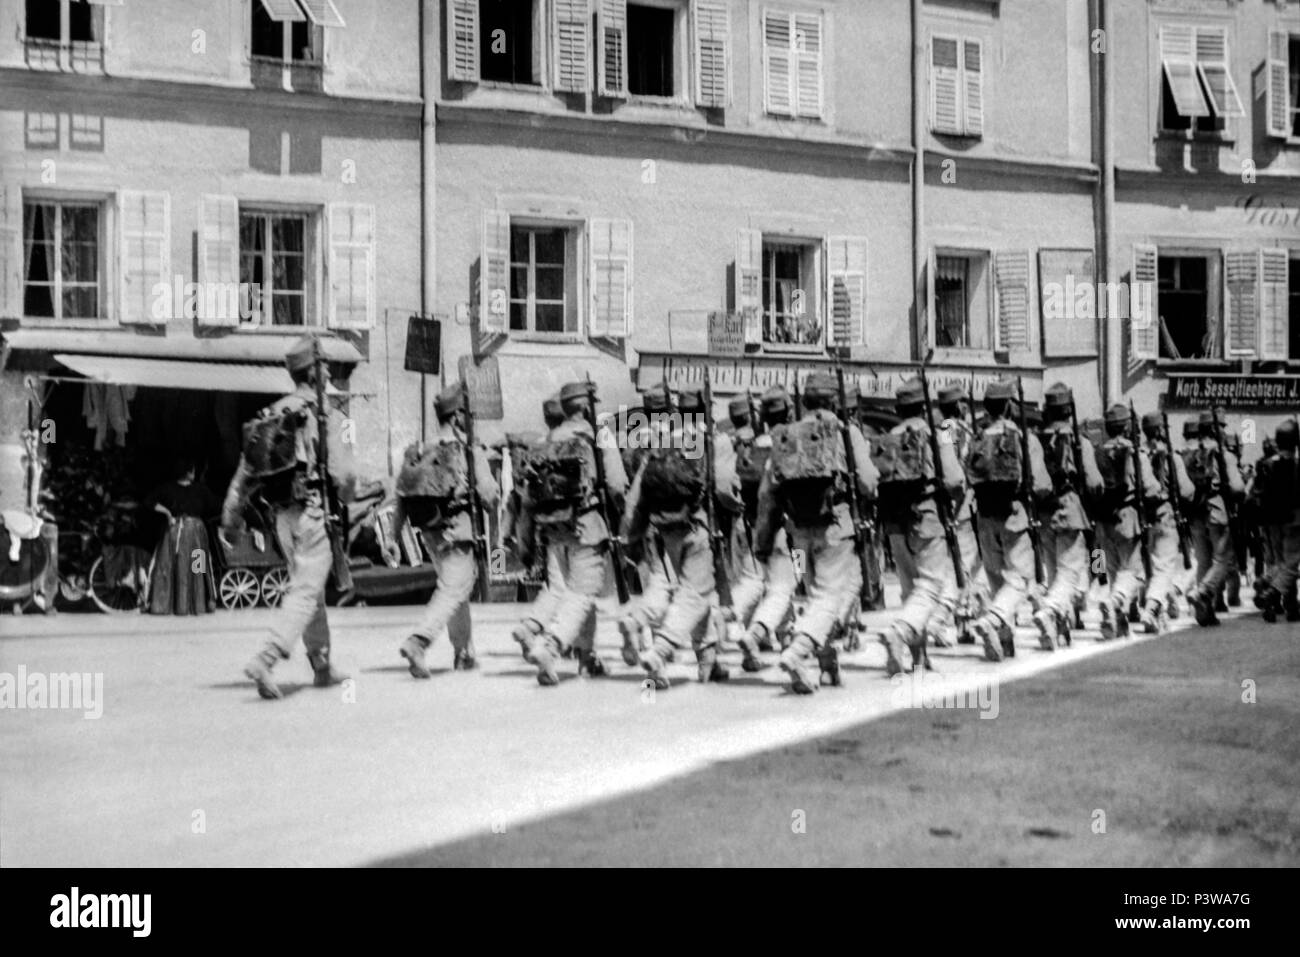 WWI Saltzburg Troops in the street by Rawlinson. Please note that due to the age of the image their might be imperfections showing. Stock Photo